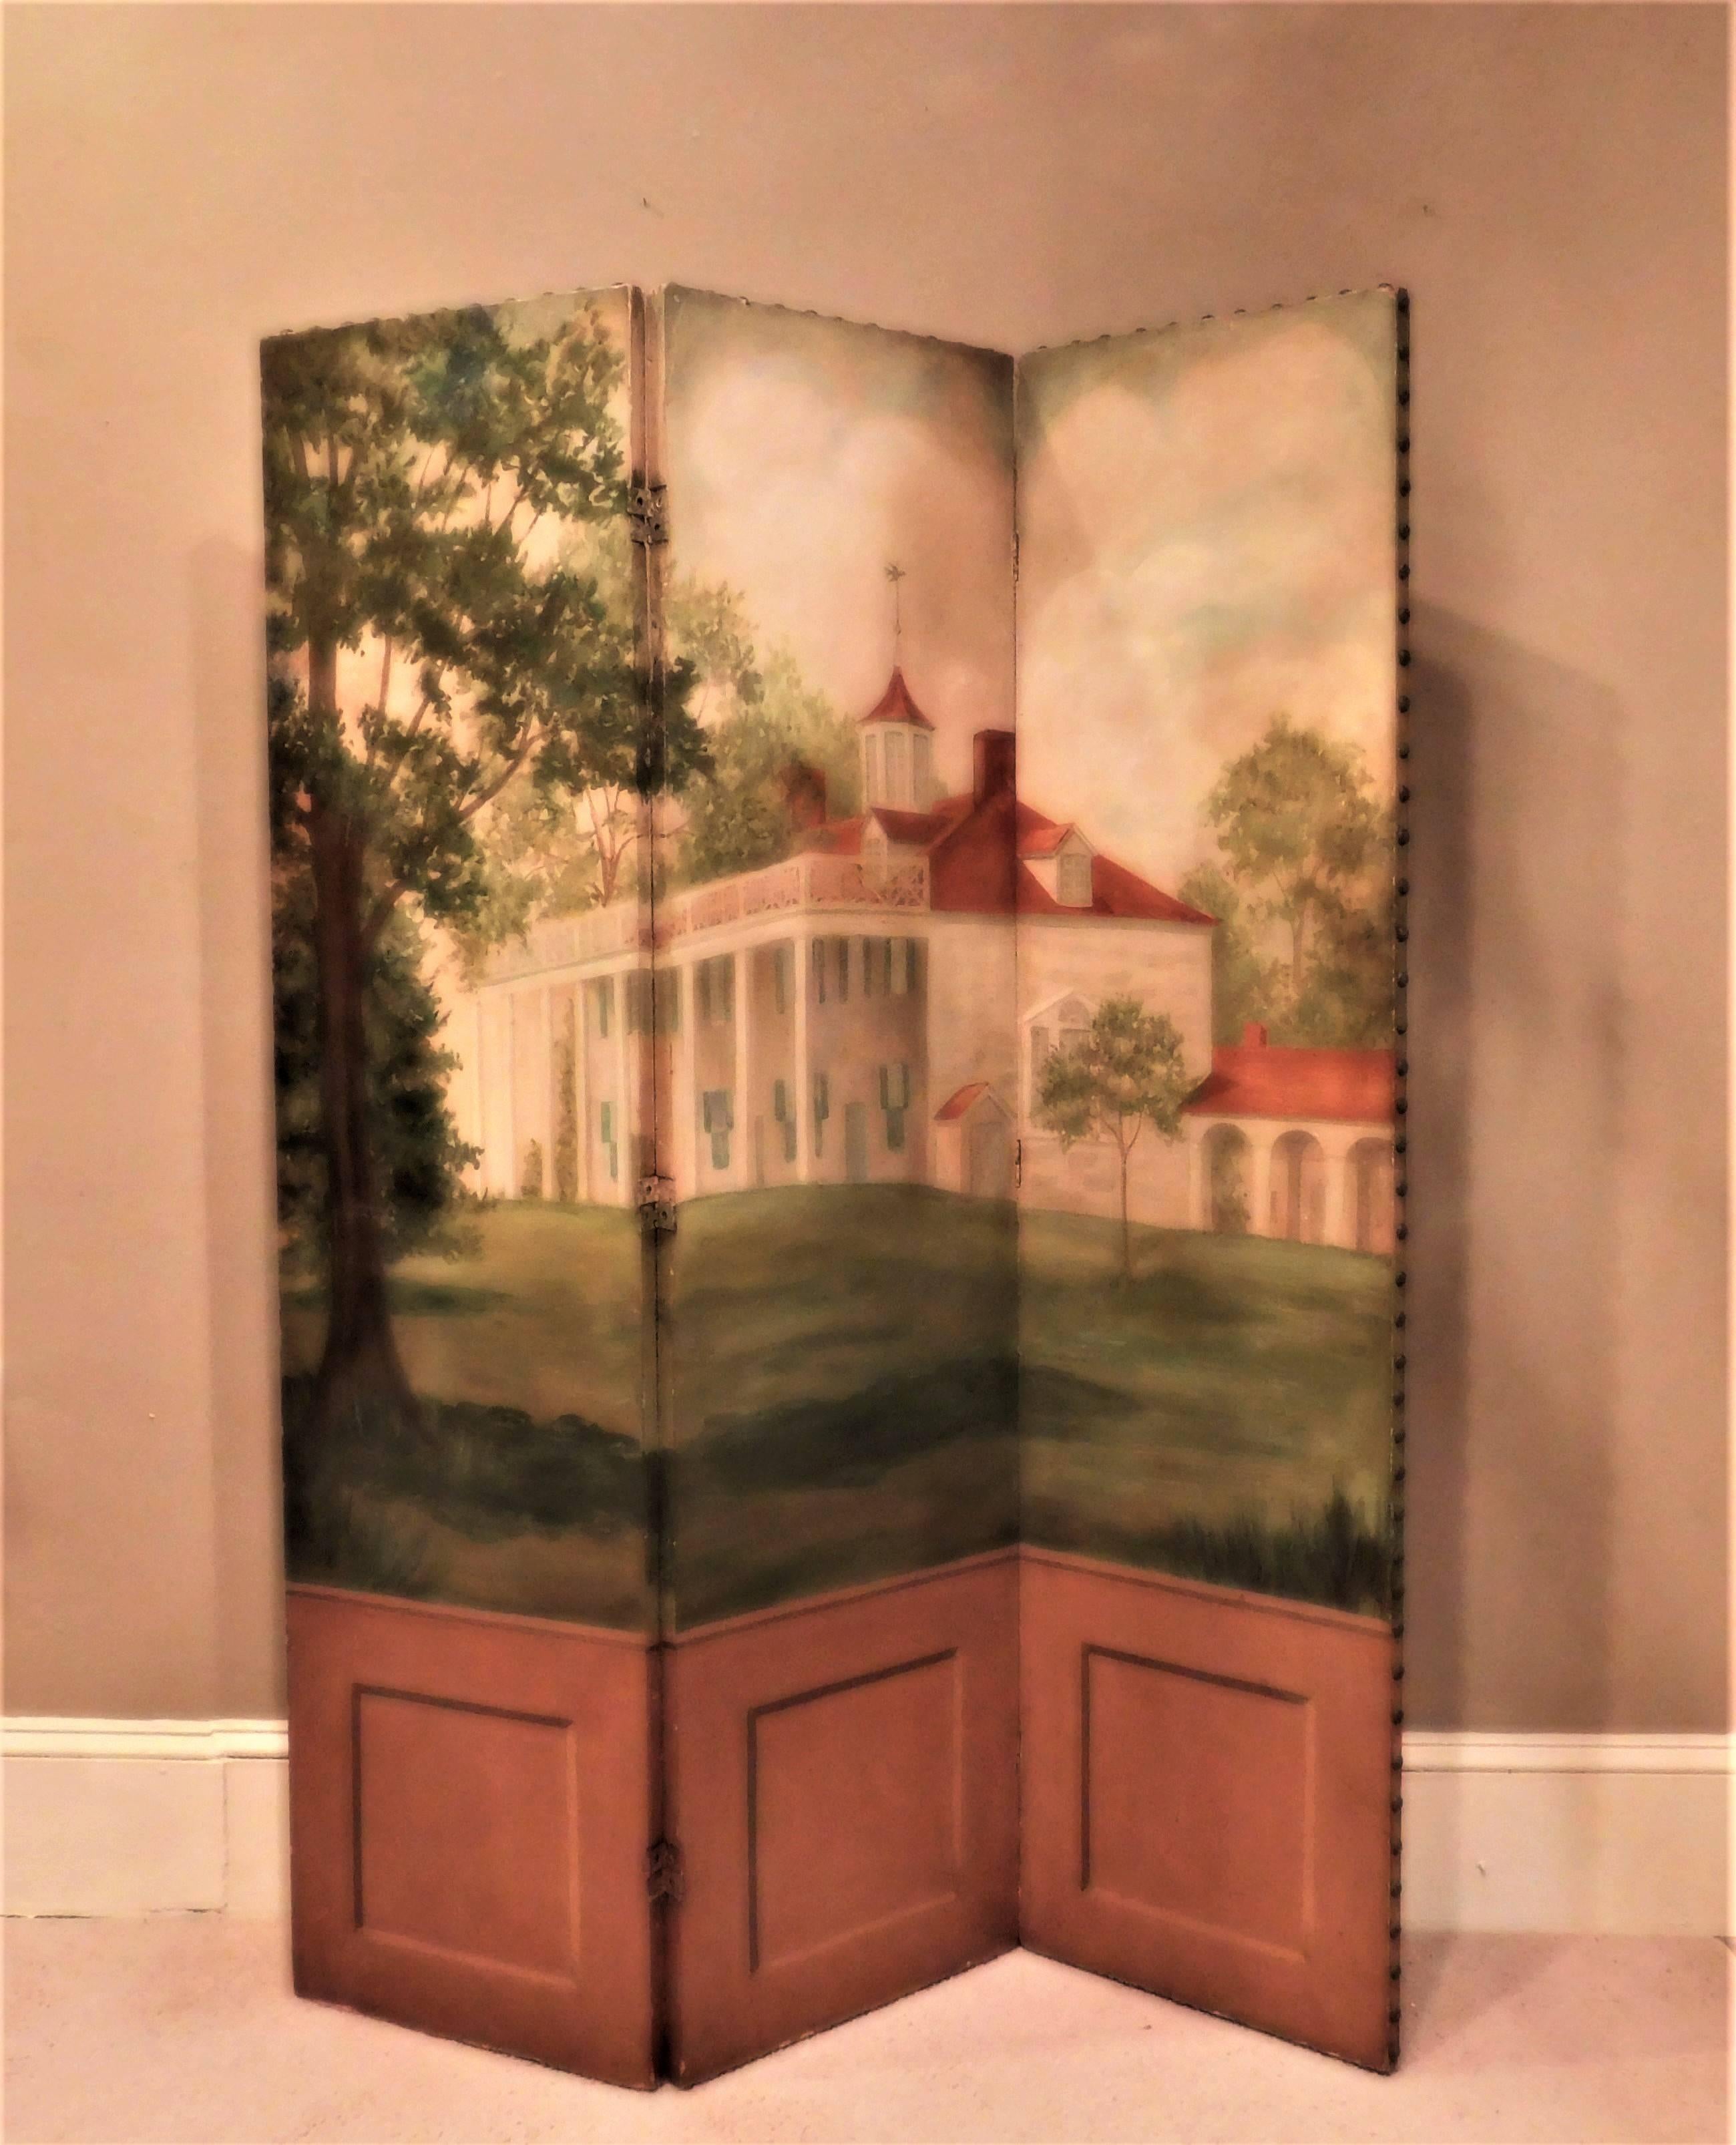 The screen was probably painted in the Washington, DC area. It is a depiction of Mount Vernon, George and Martha Washington's Virginia plantation home, prior to the removal of the decorative balustrade on the porch roof. Oil on board with trompe